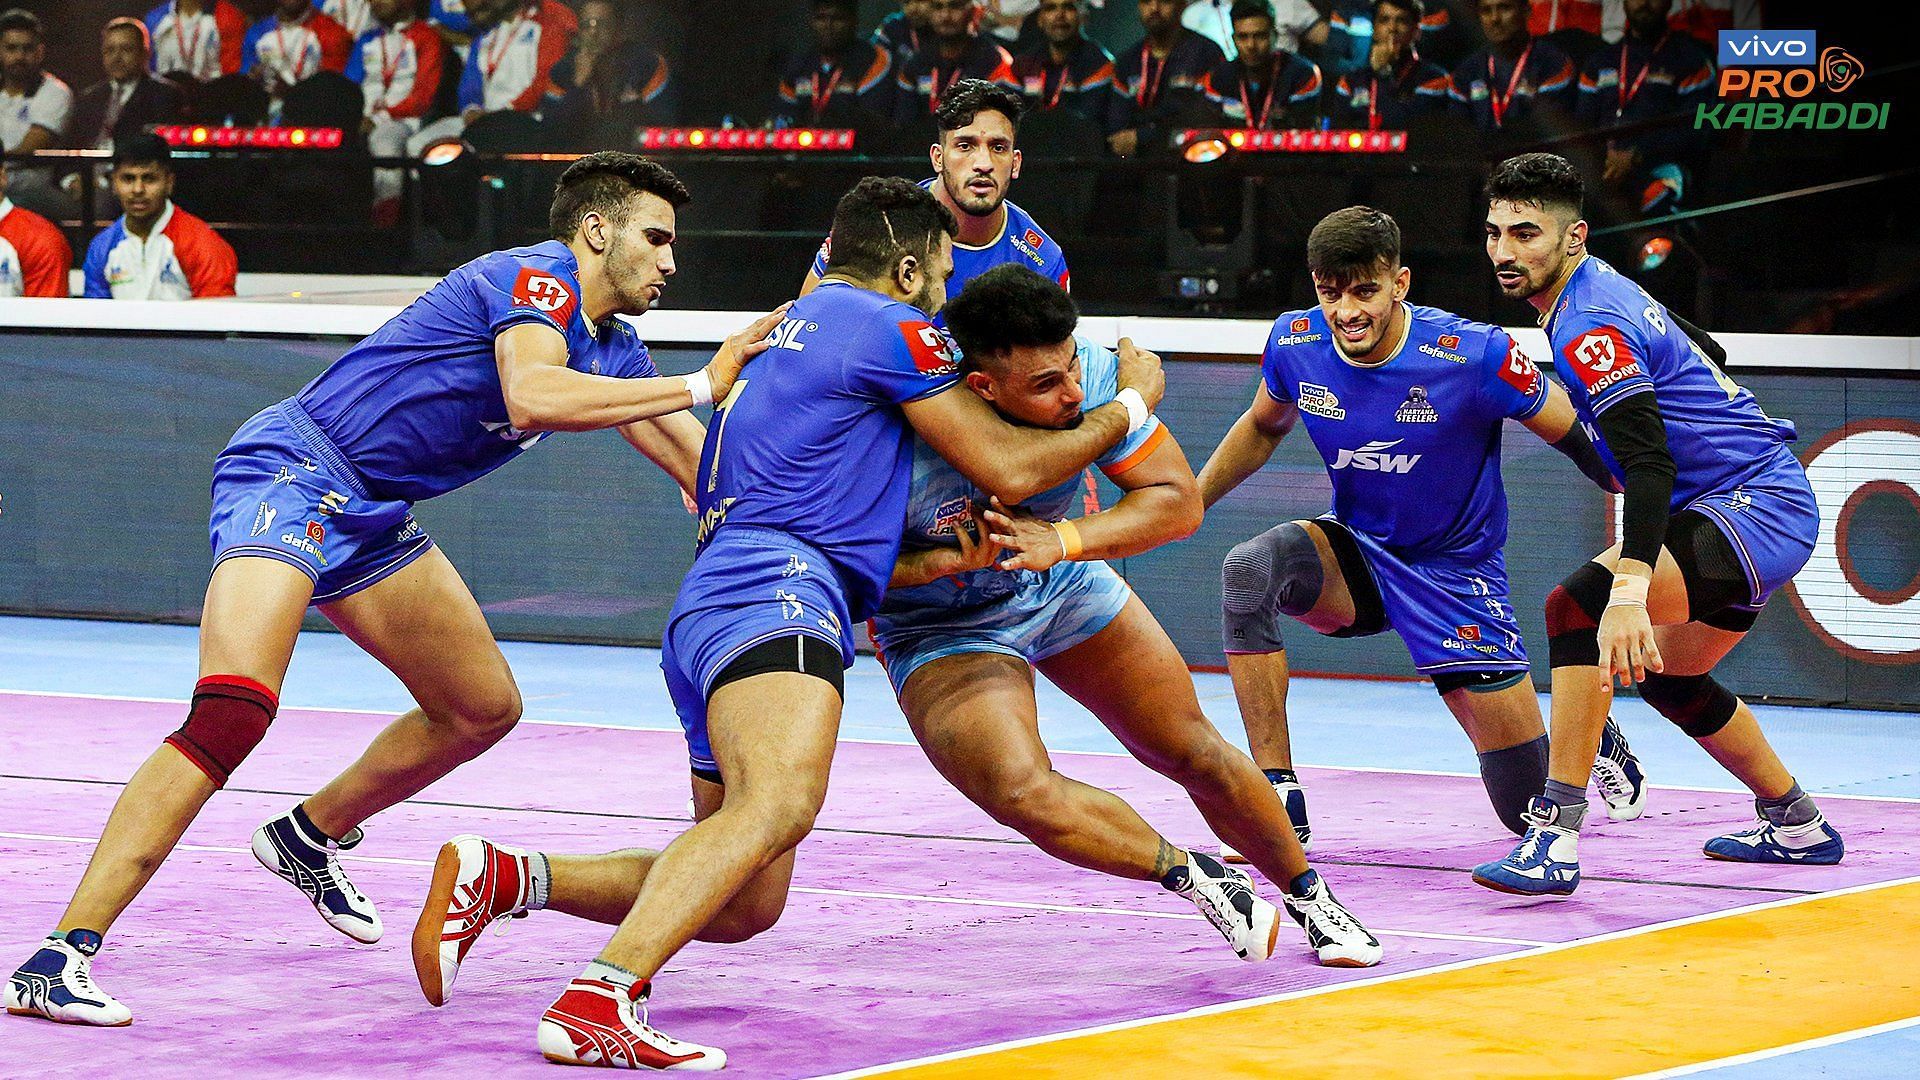 Can Maninder Singh guide Bengal Warriors to a victory? (Image: PKL/Twitter)